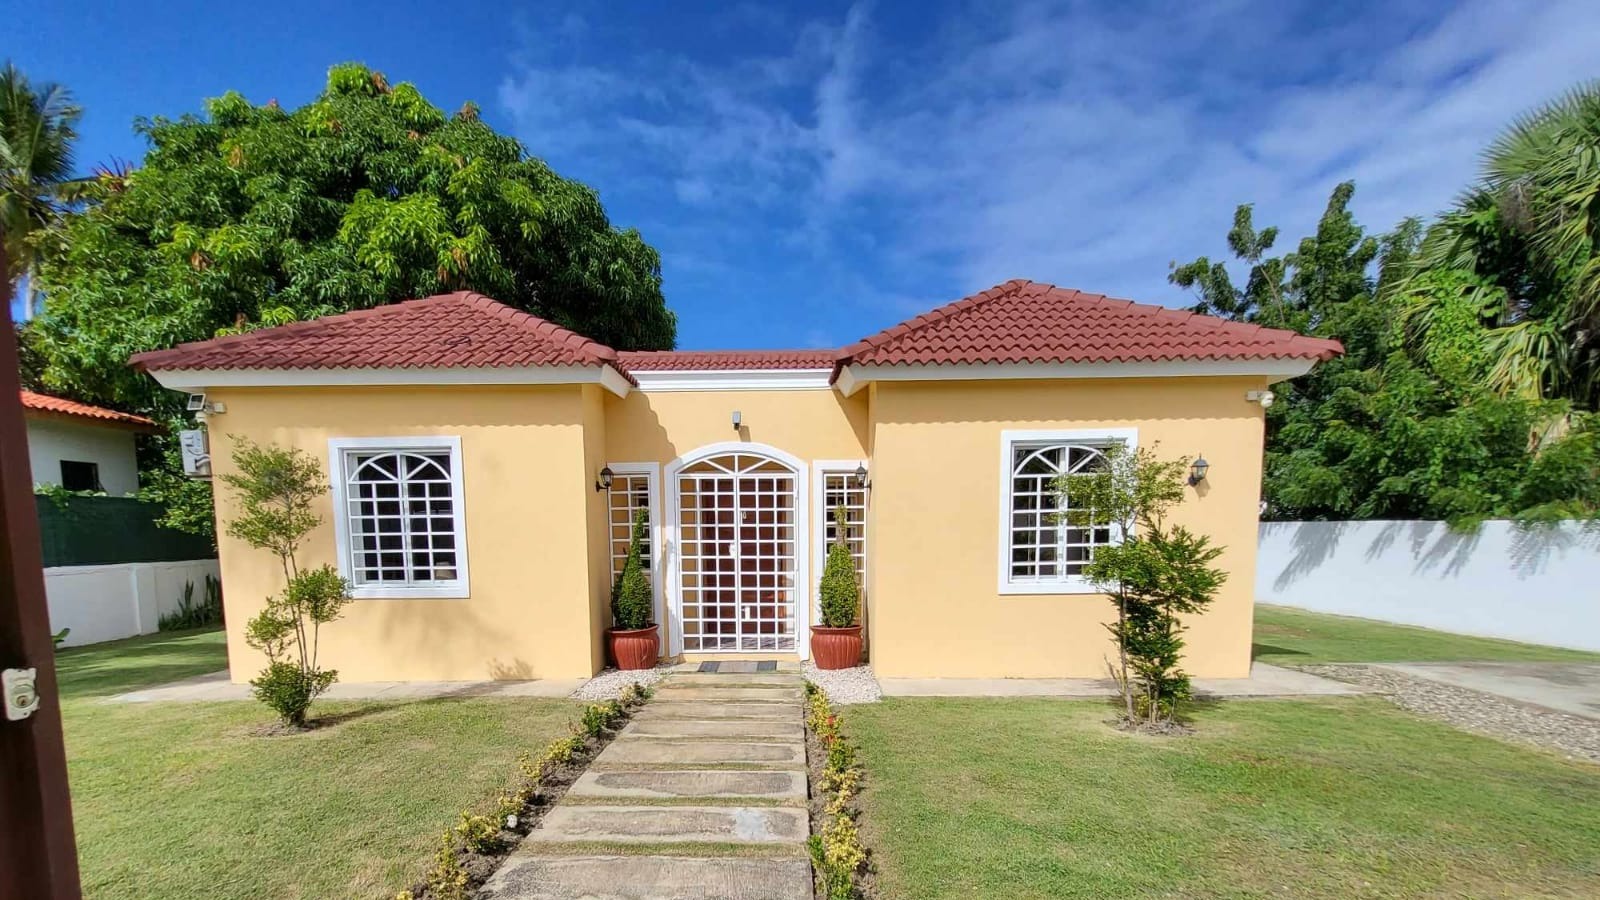 Villa for sale Costambar, Puerto Plata 3 minutes from the beach